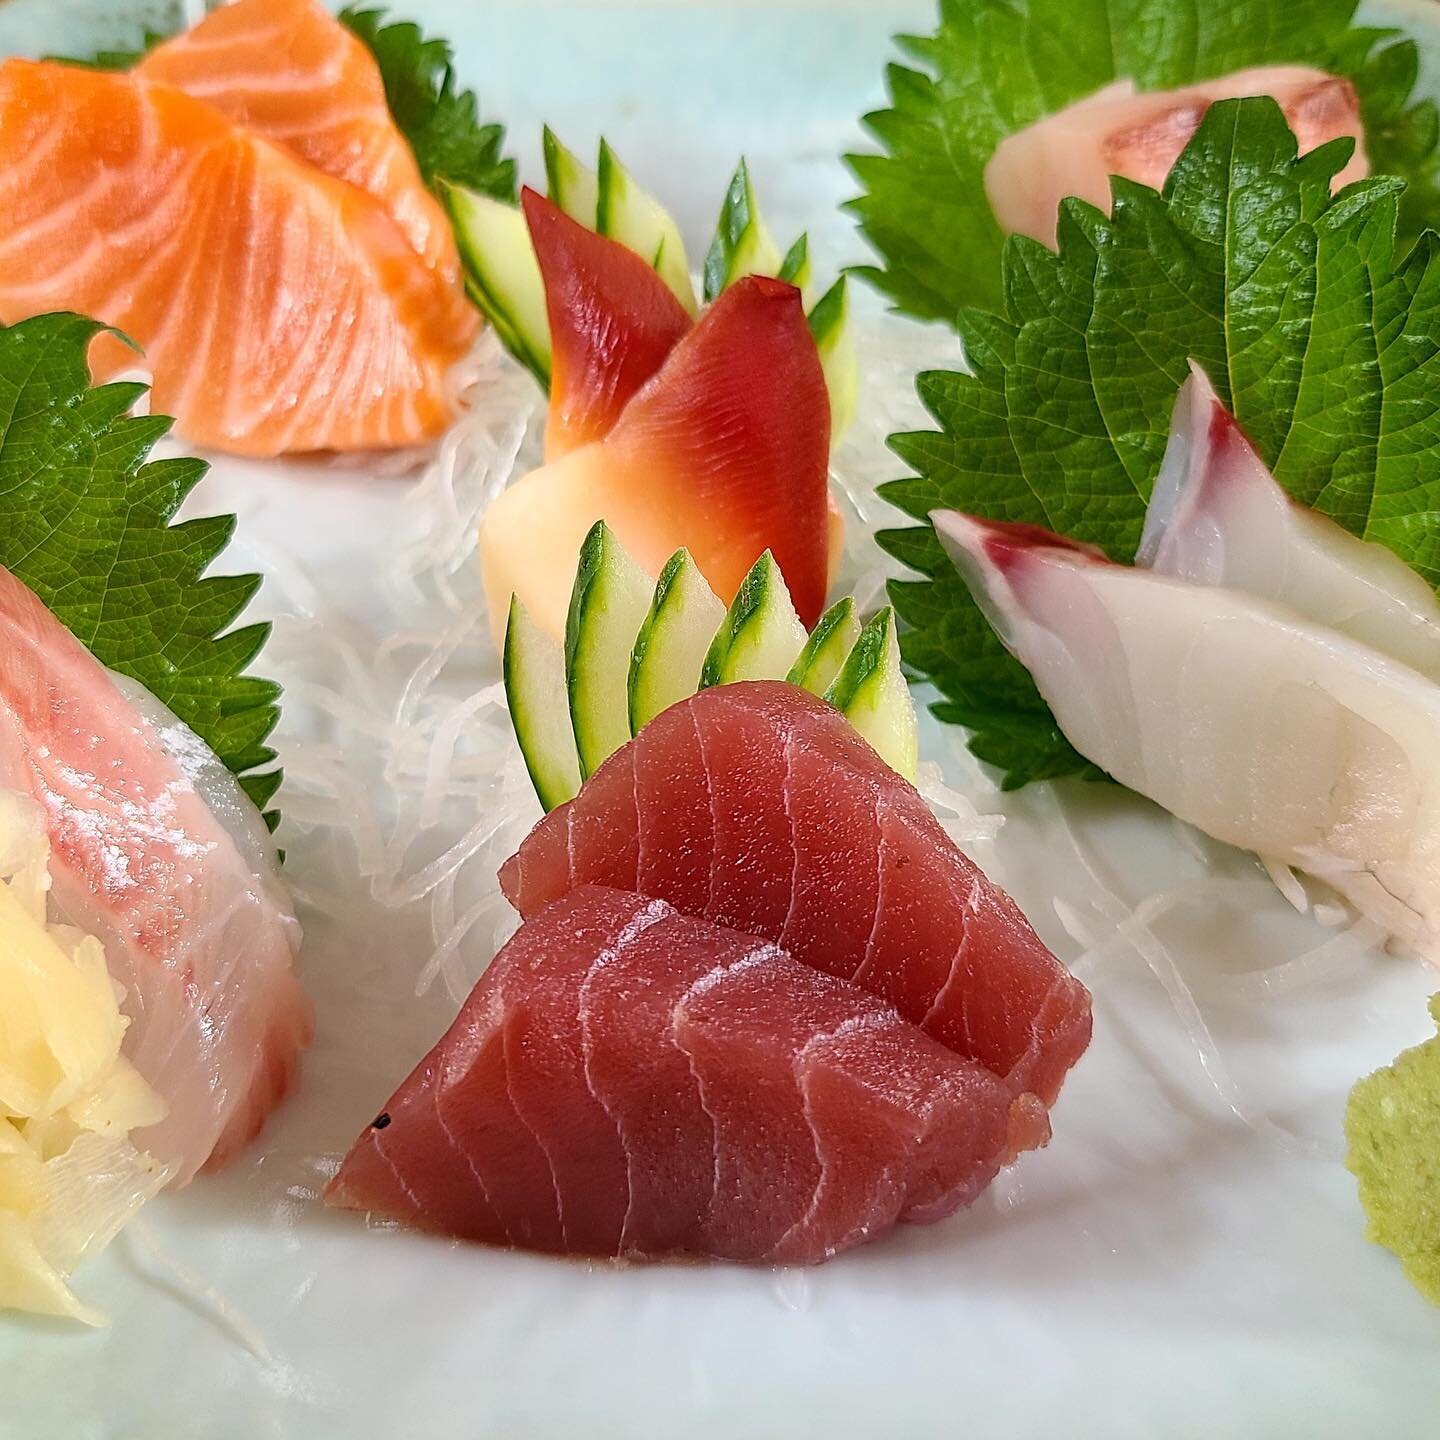 Our sashimi is the perfect dish for the heatwave. Pop down and indulge in the best Japanese-food in town. 
-
-
-
-
#sashimi #japanesefood #japaneserestaurant #food #foodie #foodblogger #foodphotography #sushilovers #sushiporn  #sushinoen